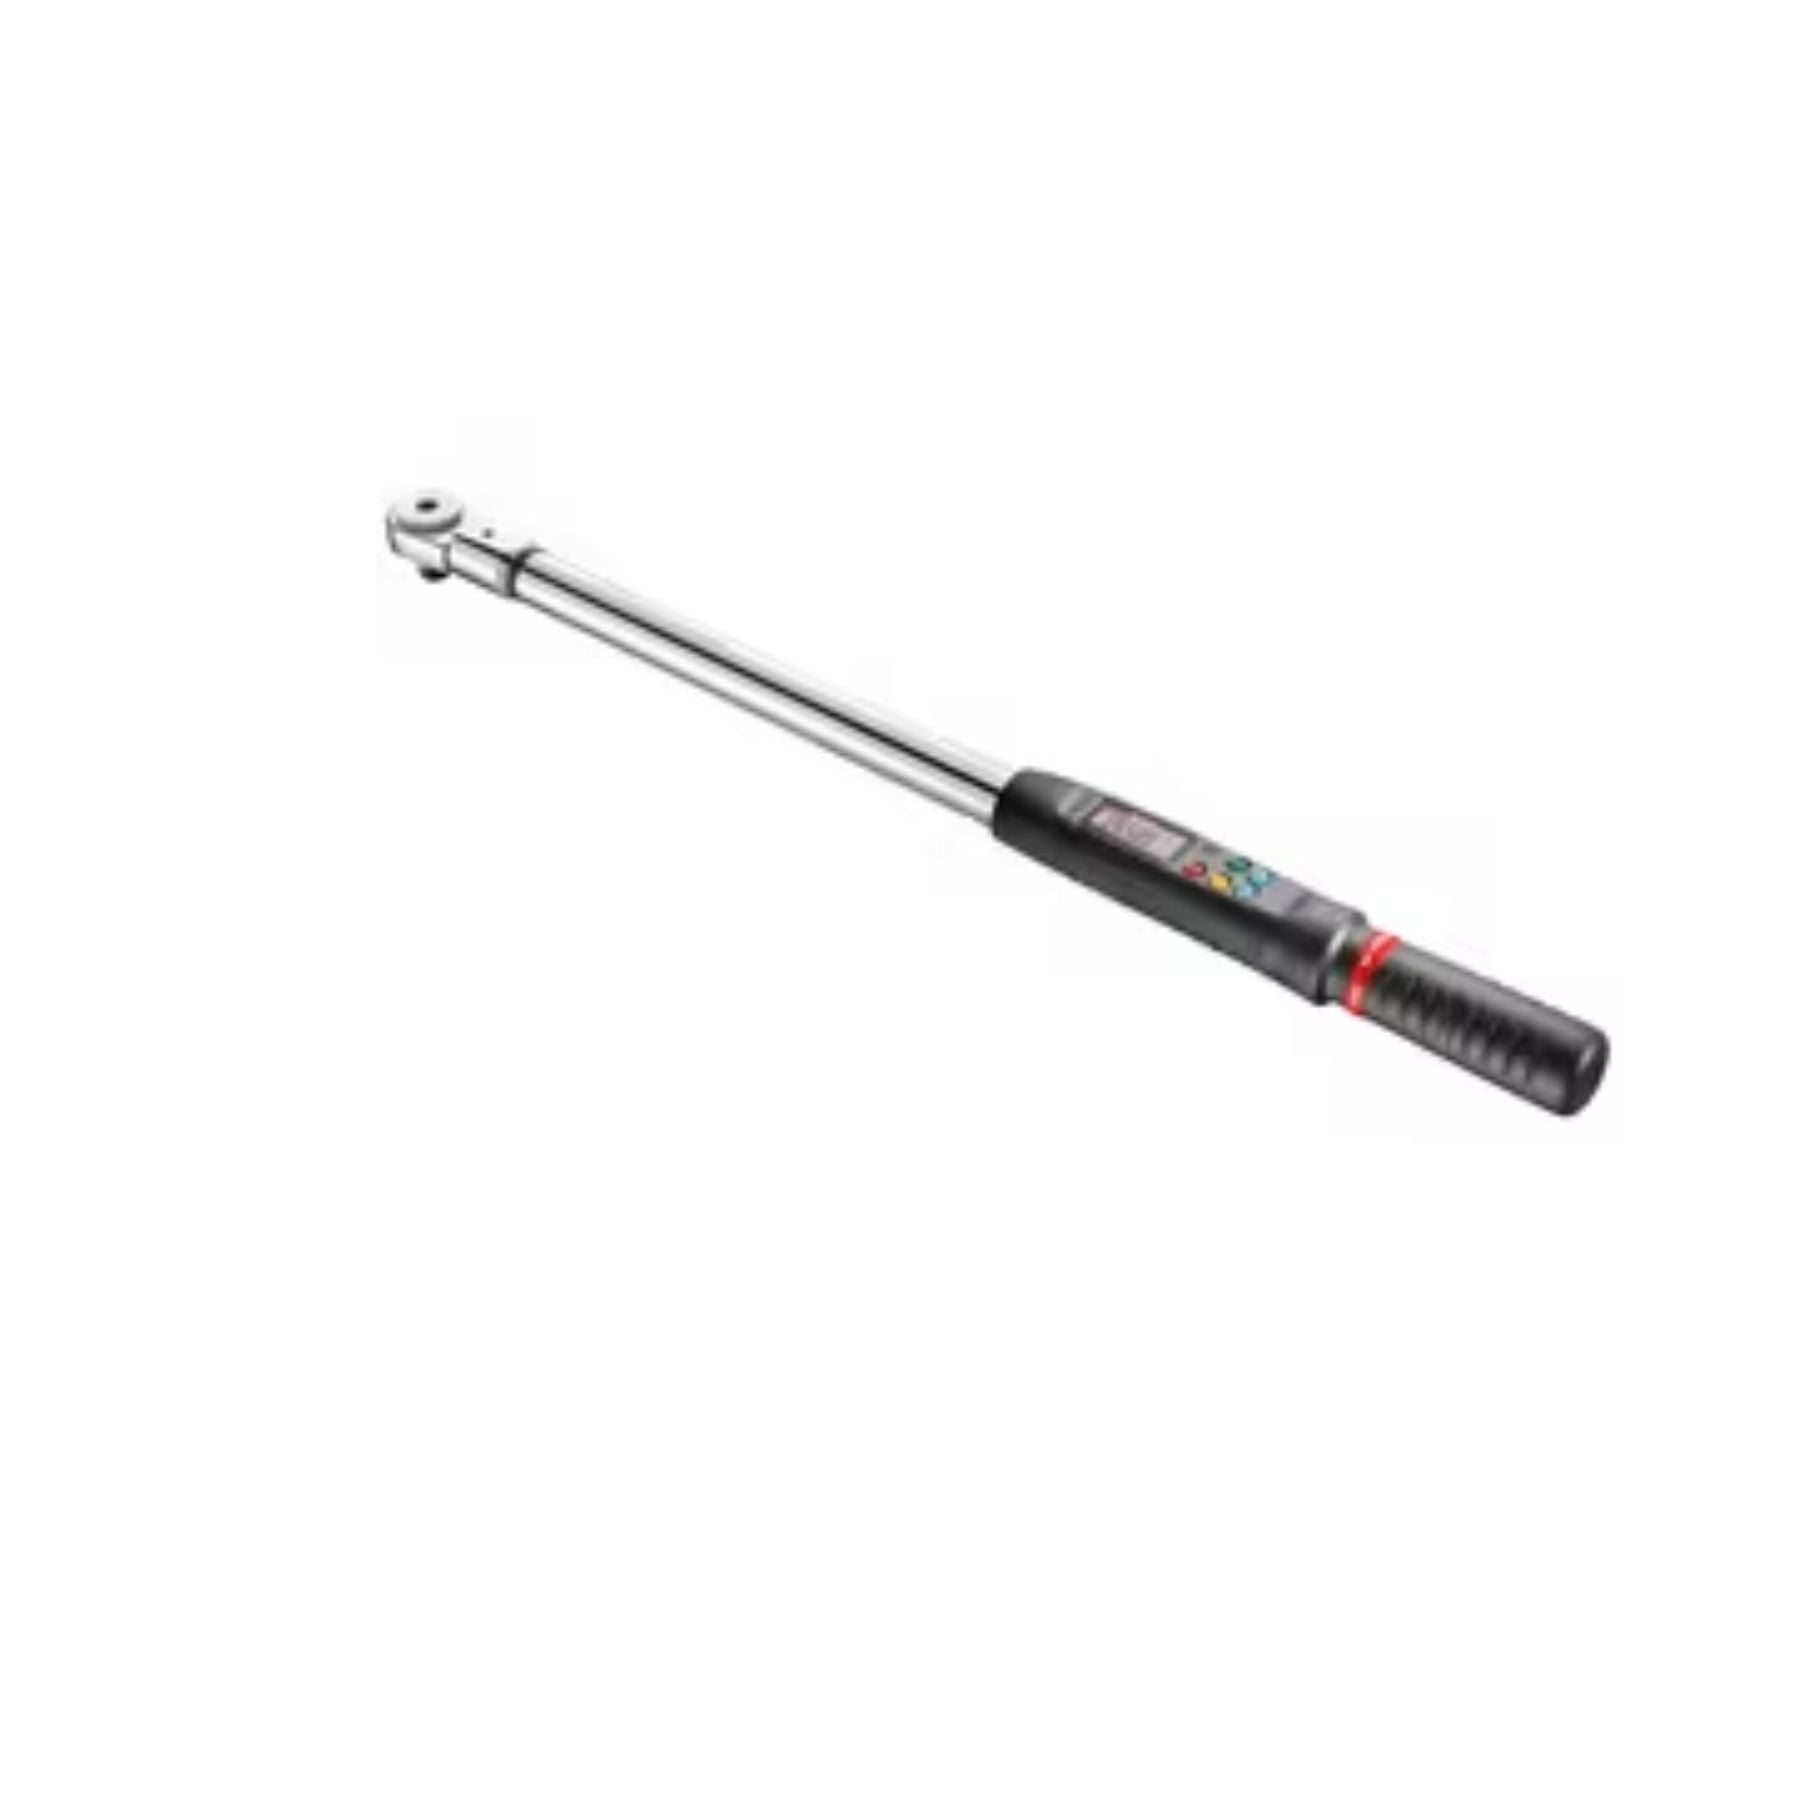 Facom E.306A340S Digital Electronic Torque Wrenches with Ratchet